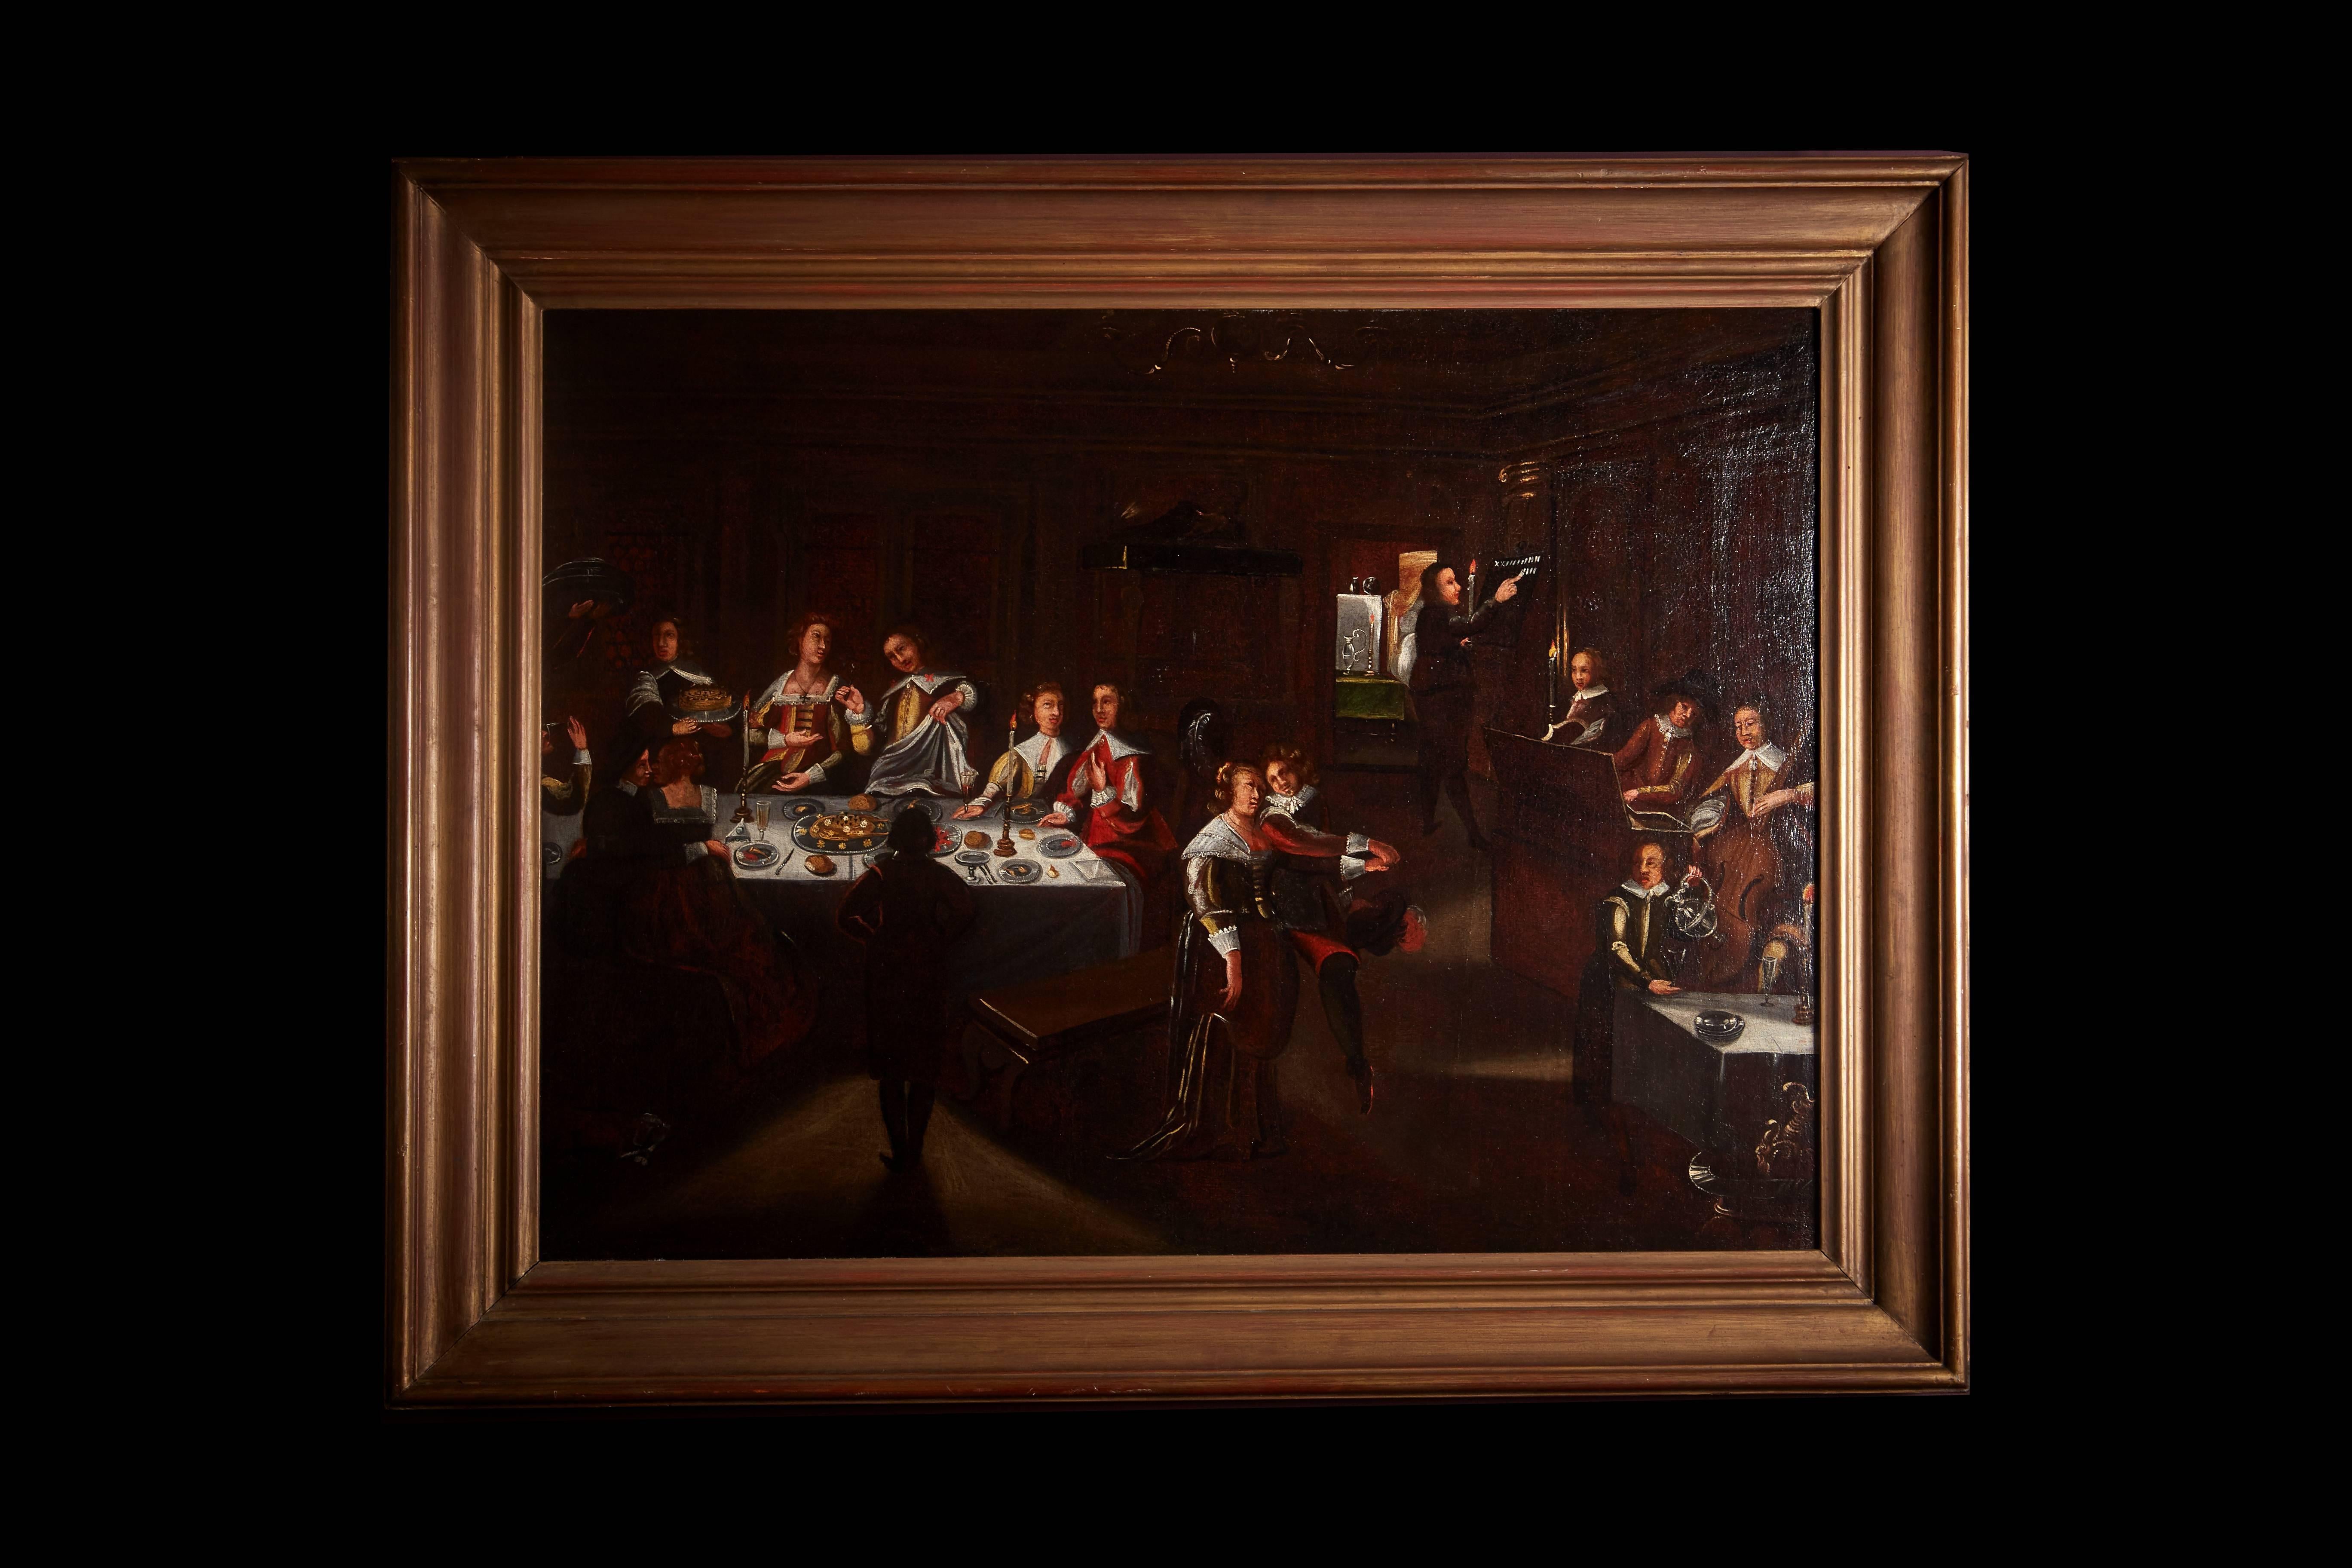 A charming and intriguing candle light depiction of a group of Flemish noble men and women at a banquet. Fine dishes of food can be seen laid on the table, guests are engaged in heady conversation, dancing and intimate flirtation. Onlookers include